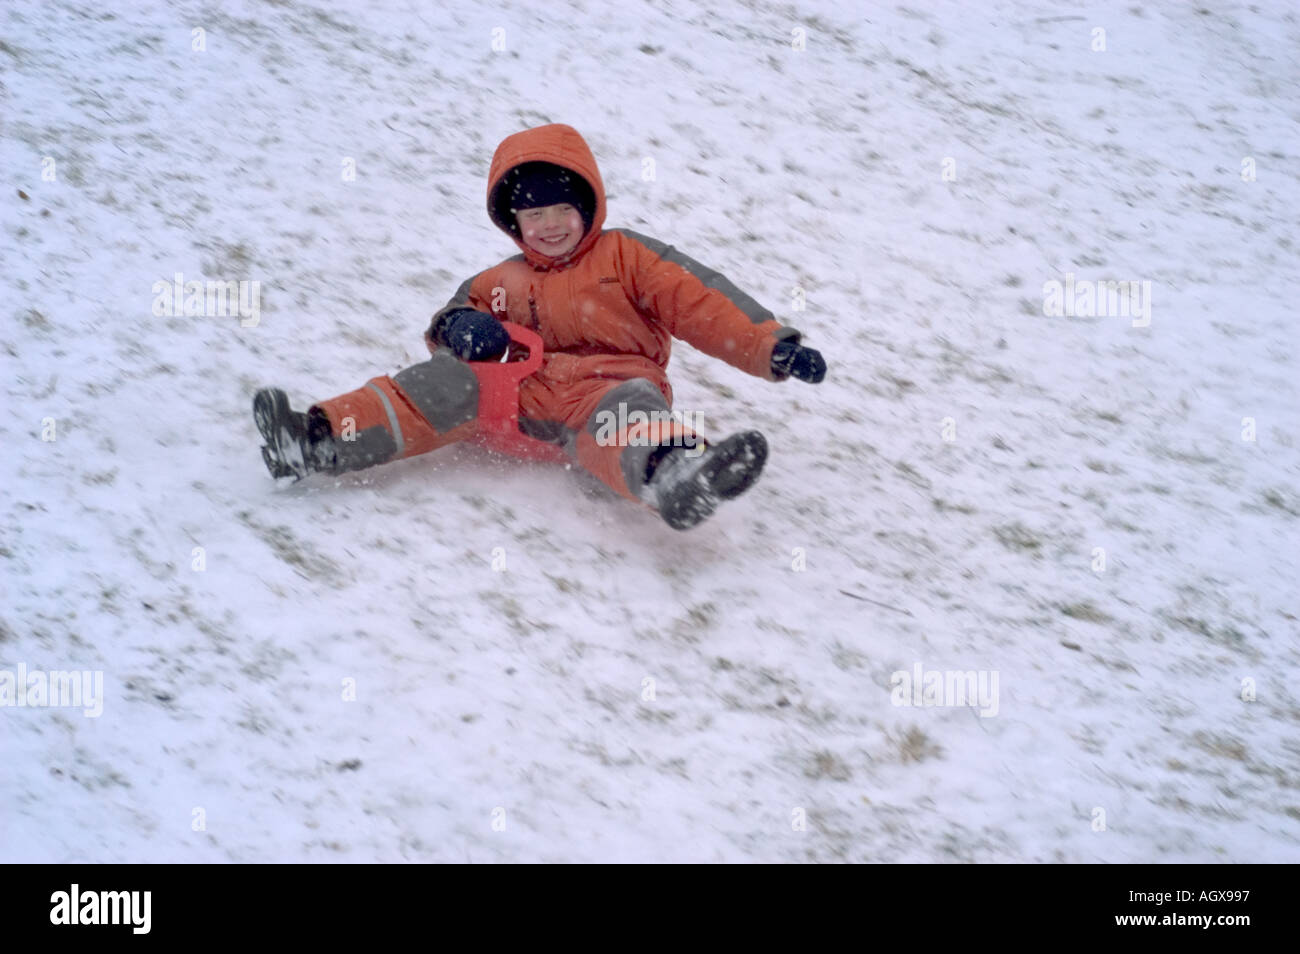 MR Fife year old boy sliding down a slope Stock Photo